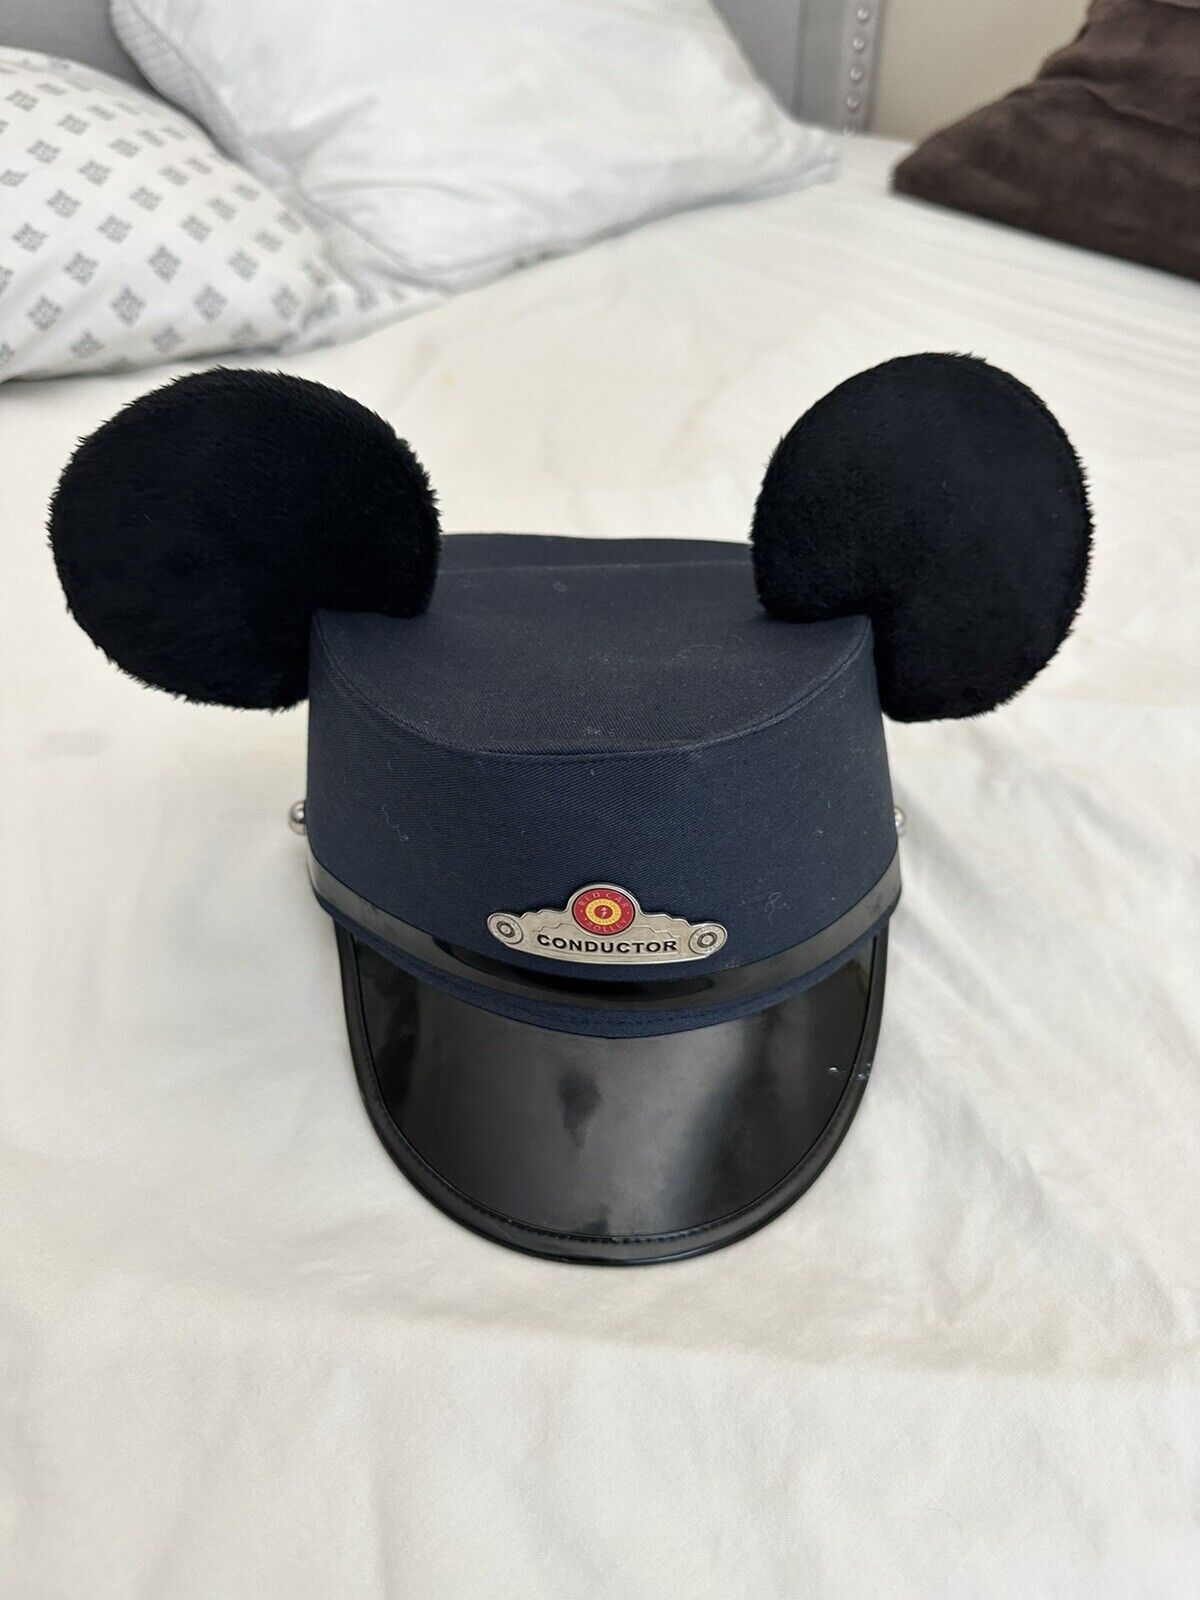 Disney Parks Conductor Hat Size Youth Small Medium Minor Wear